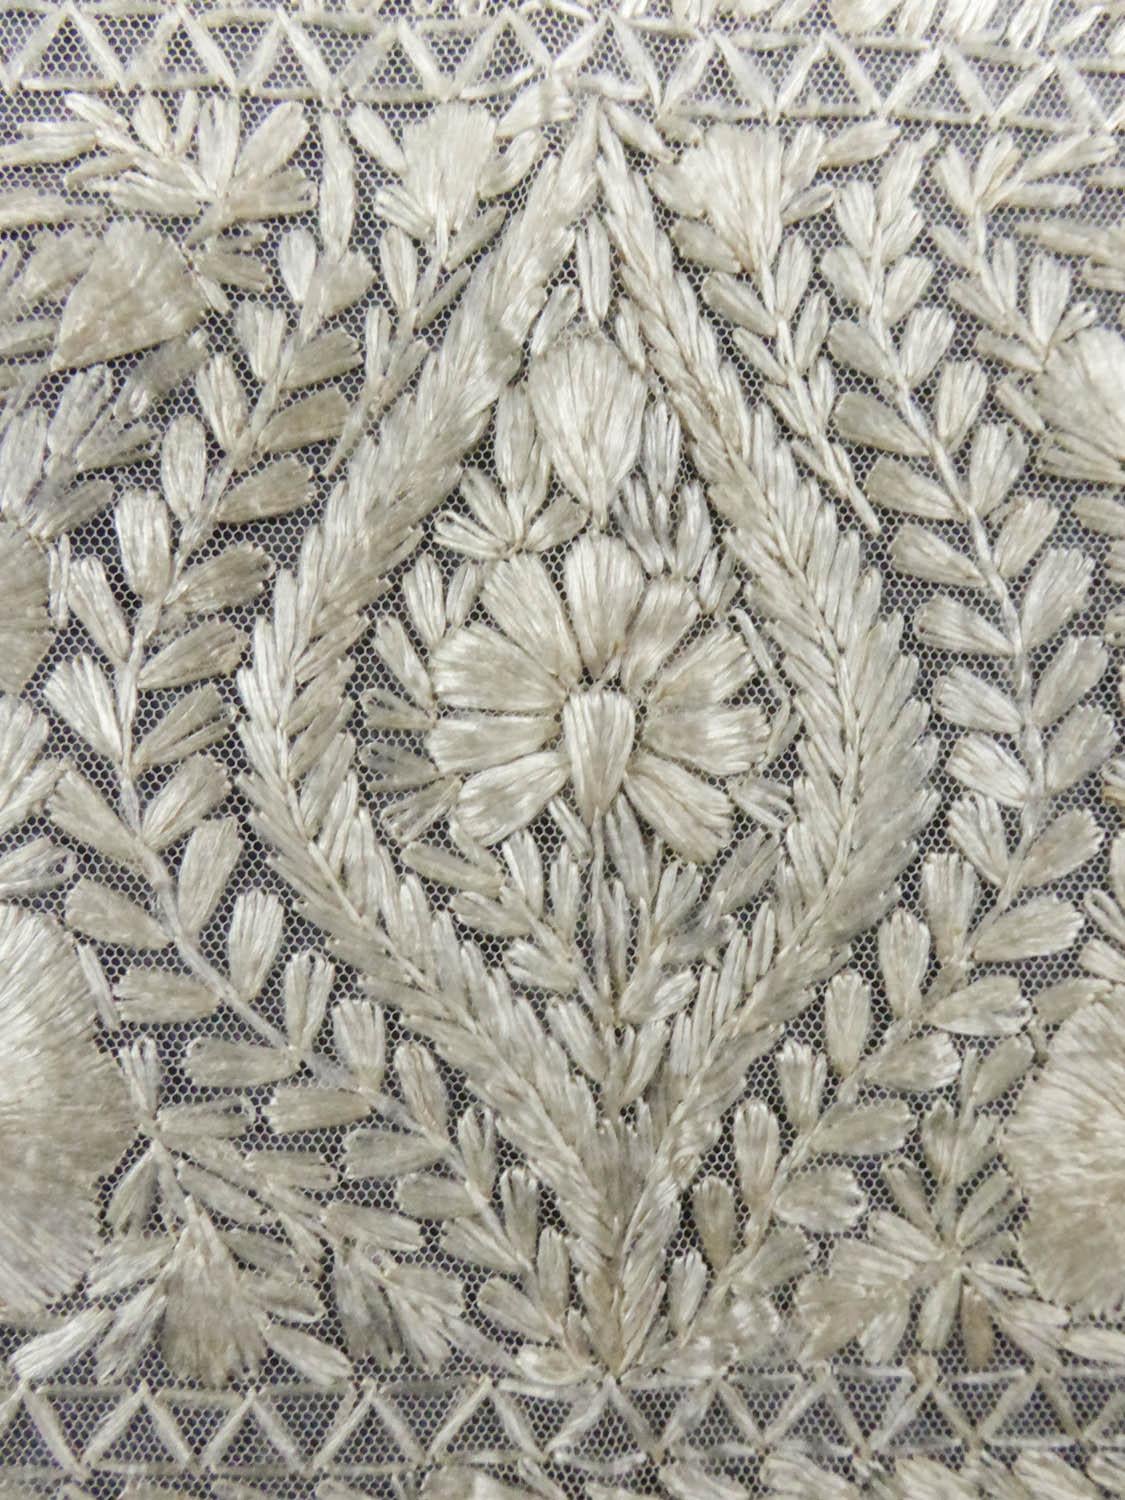 Turn-over shawl in Silk embroidered on Cotton Net - Circa 1840 2